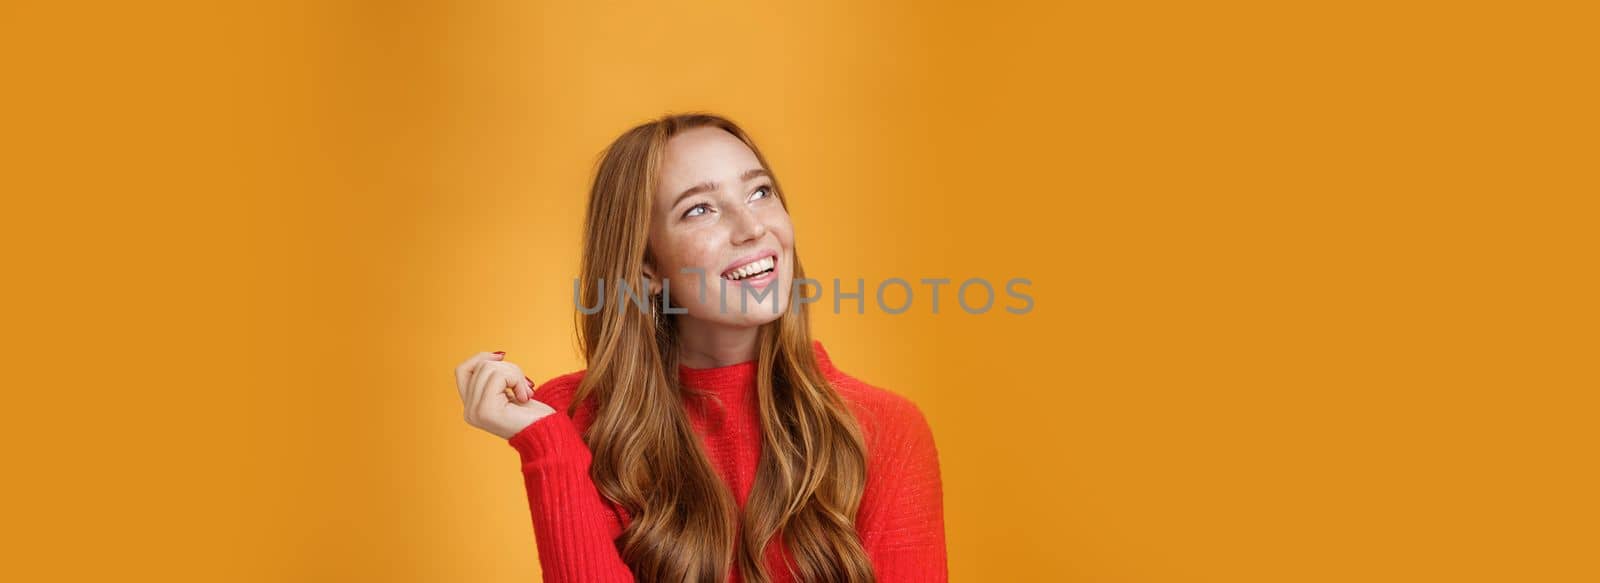 Close-up shot of nostalgic cute and sensual friendly-looking european female with nice cute memories looking at upper left corner dreamy and delighted, imaging and picturing desire over orange wall.